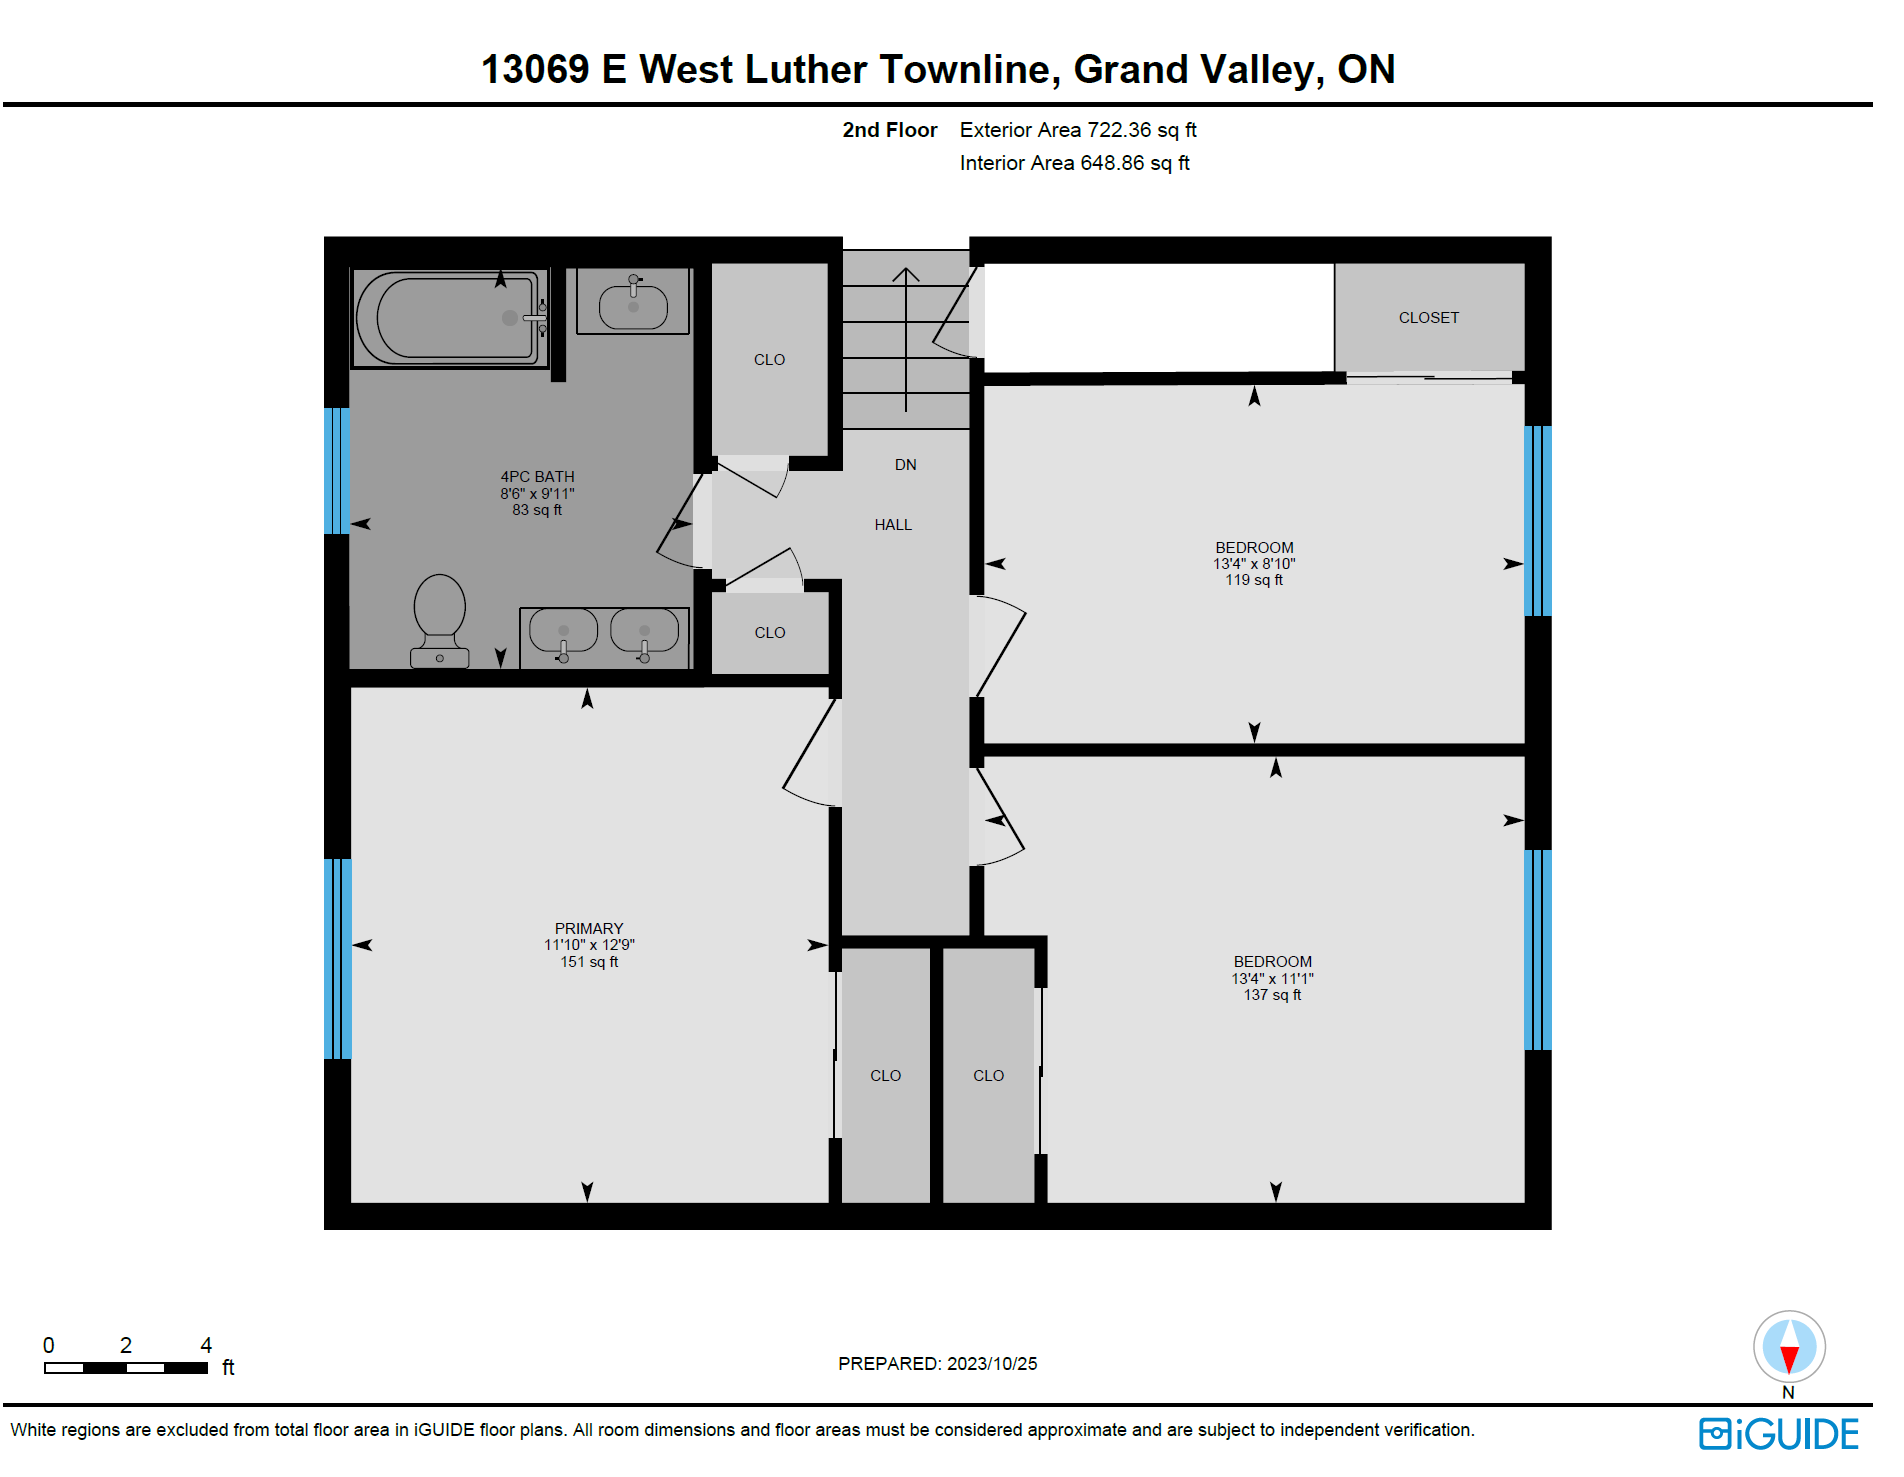 a floor plan of a house in grand valley